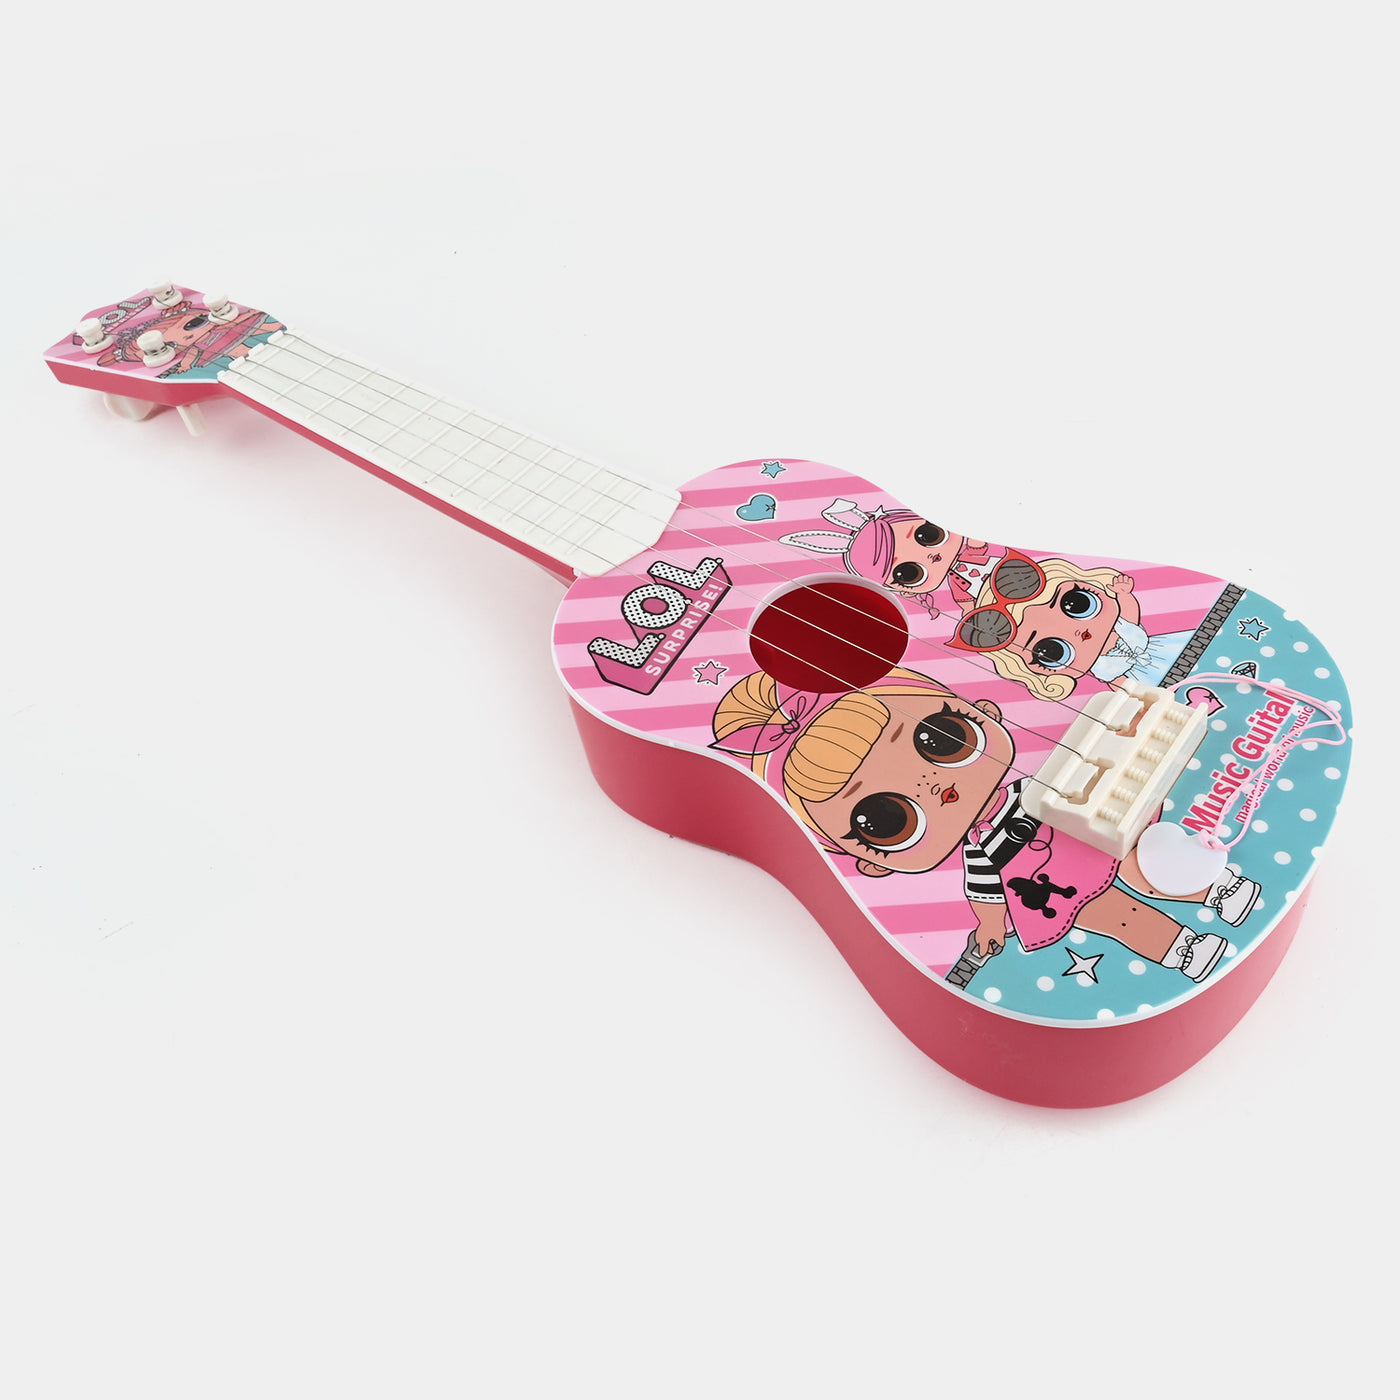 KIDS CHARACTER TOY MUSICAL INSTRUMENT GUITAR